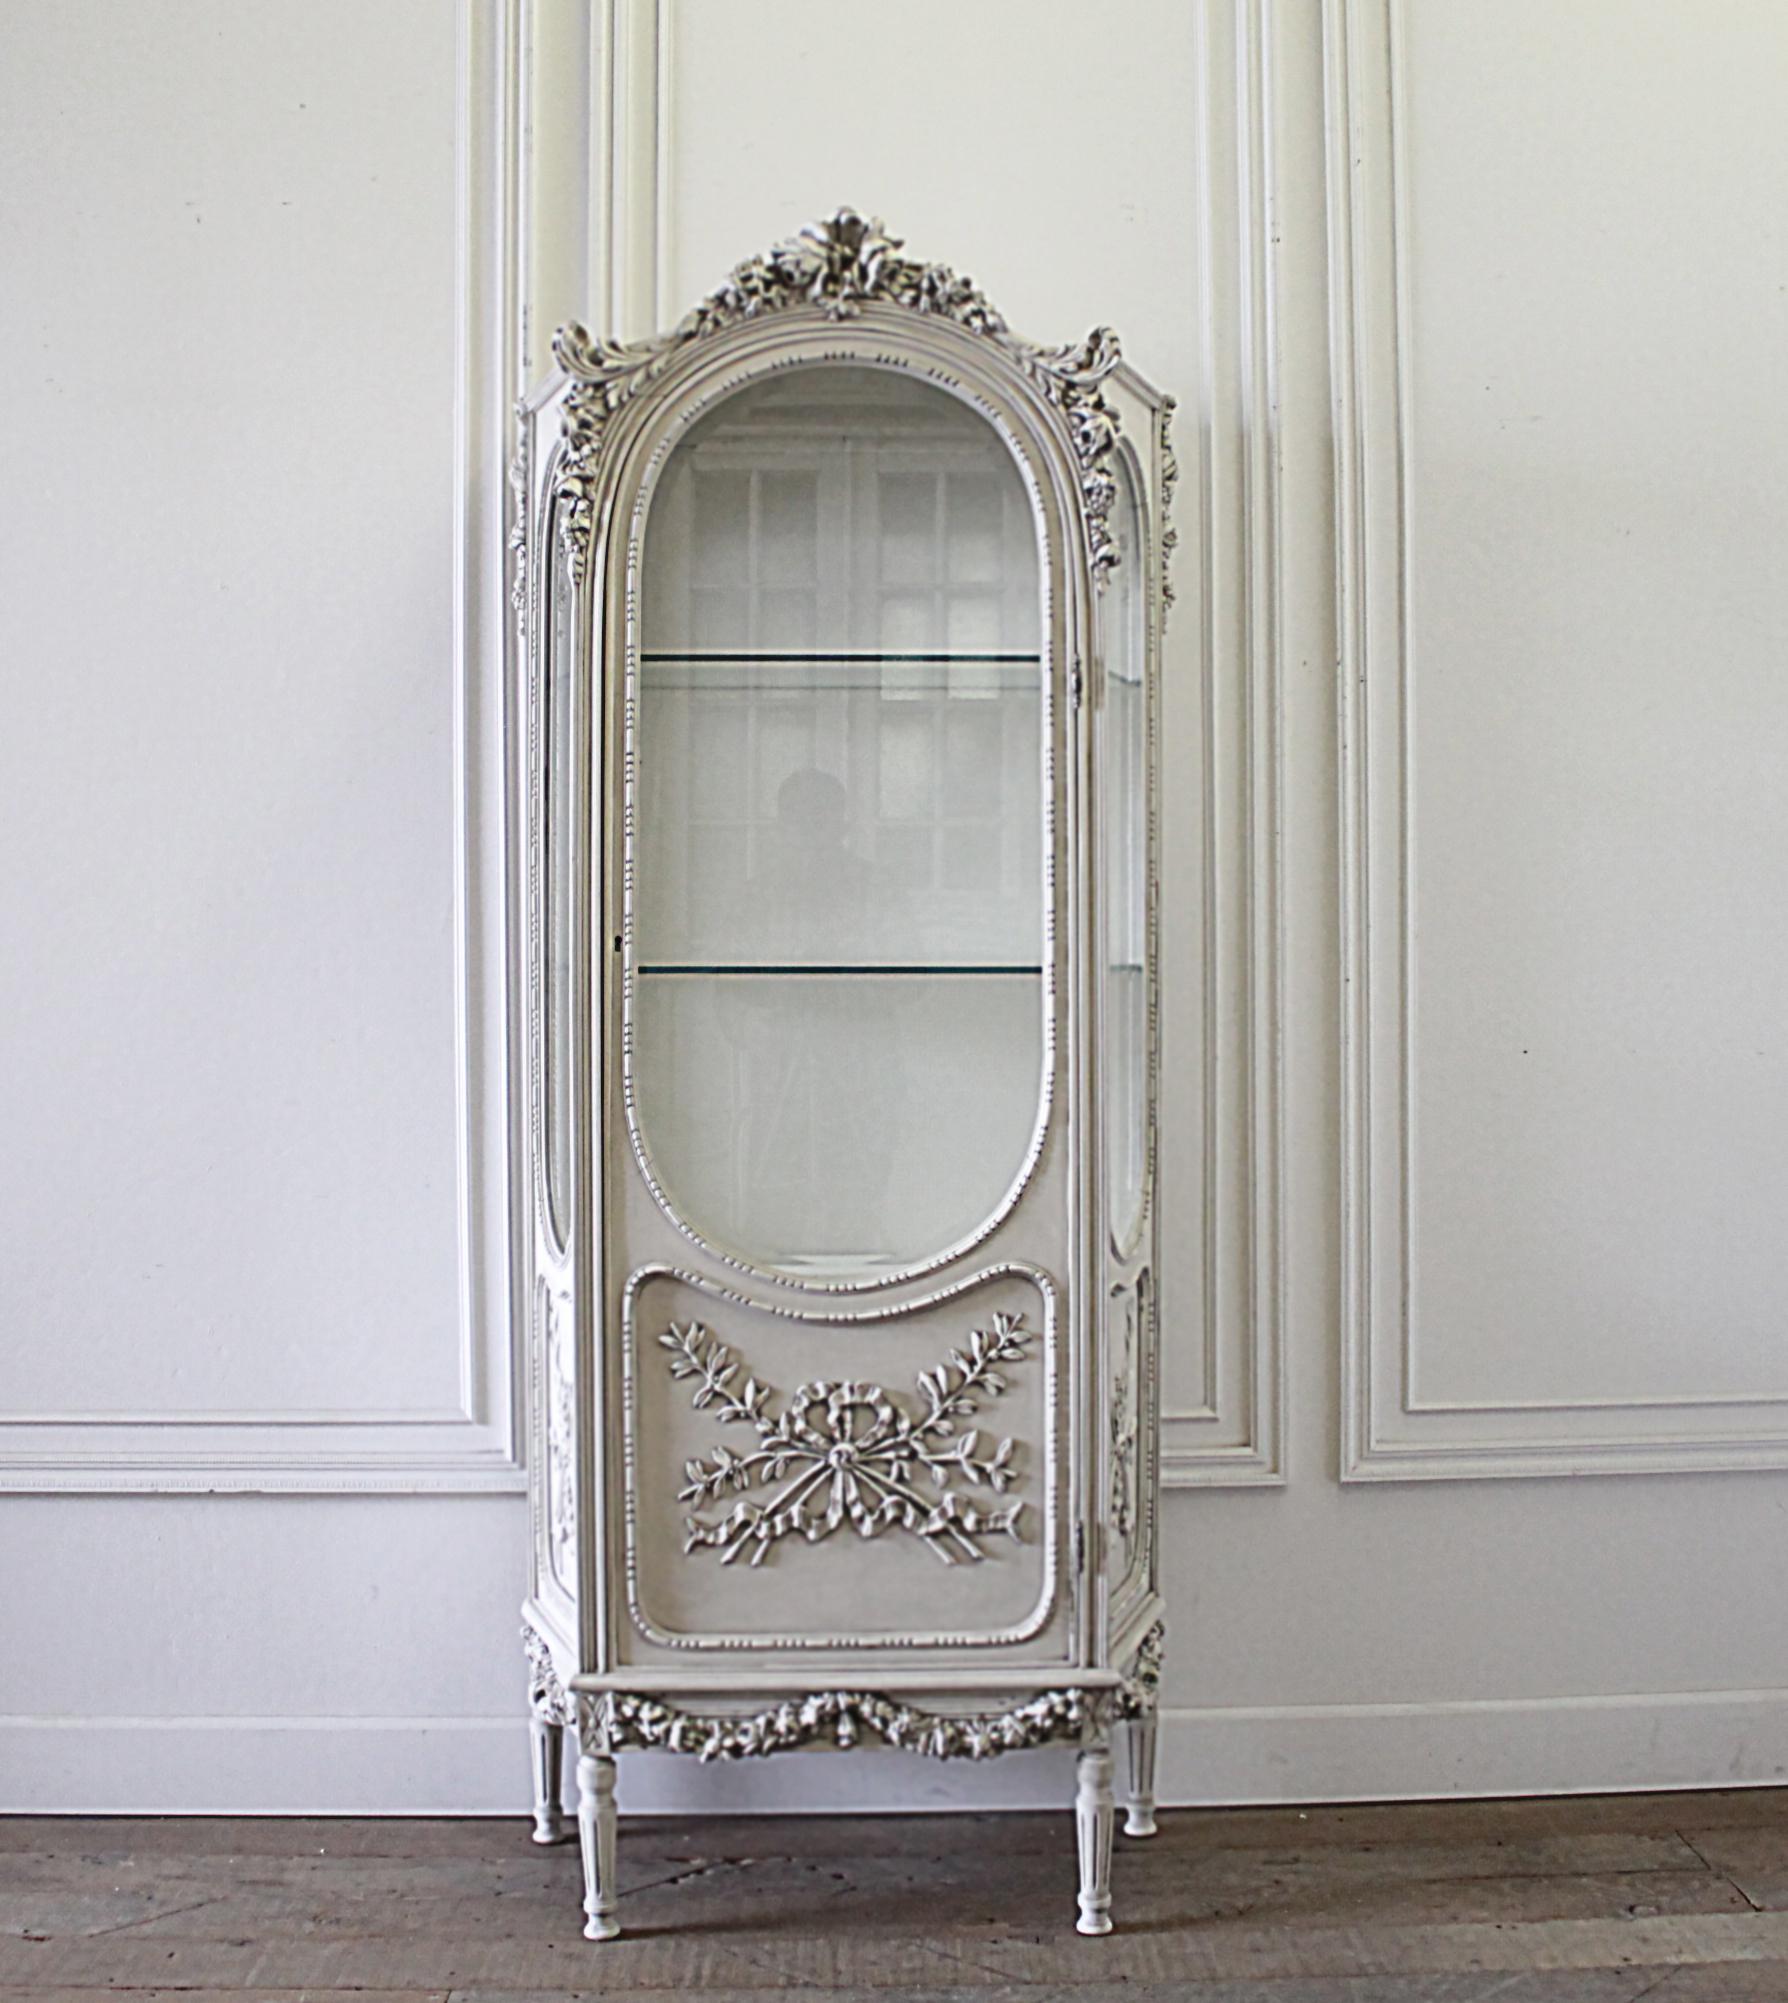 20th century Louis XVI style carved display armoire curio with rose carvings
Painted in our beautiful antique white with subtle distressed edges and finished with an antique patina. Beautiful carved rose details, and fluted legs. There are 2 glass